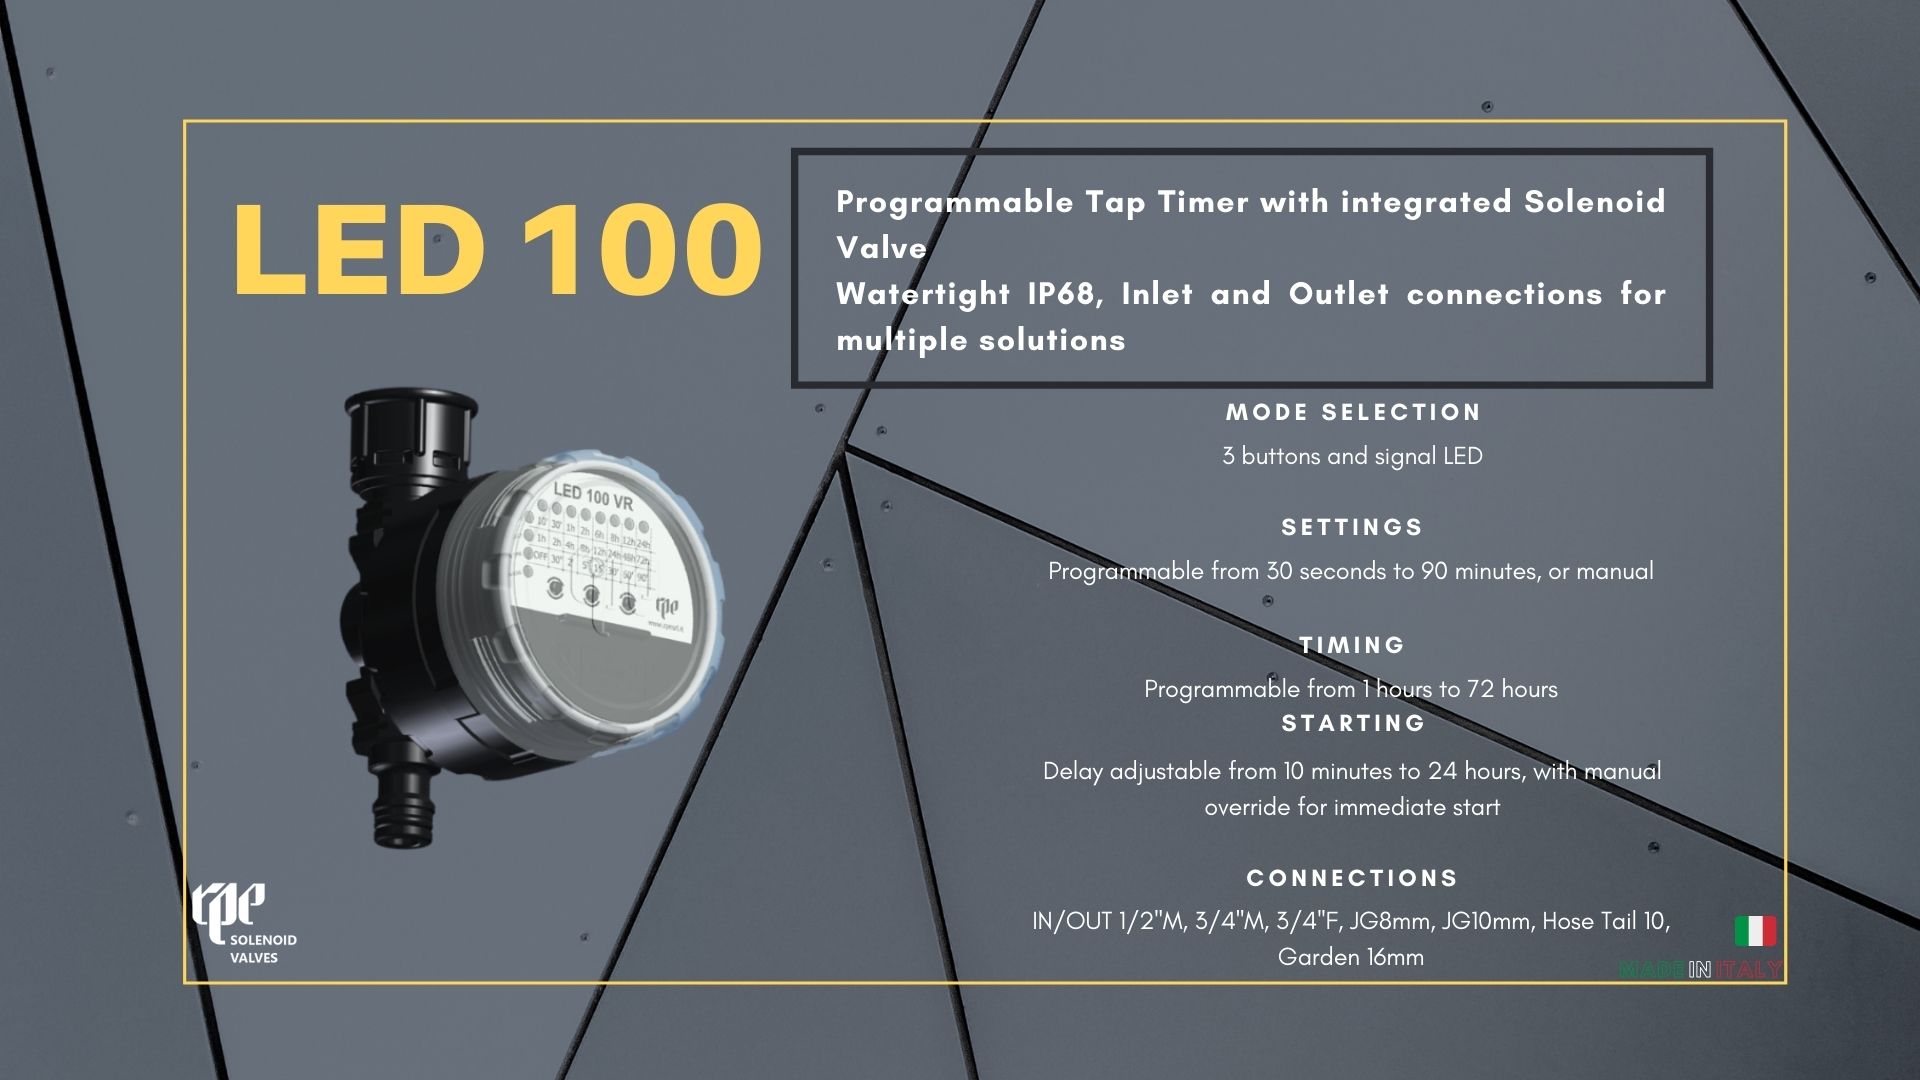 Led 100 in the fight against legionella 